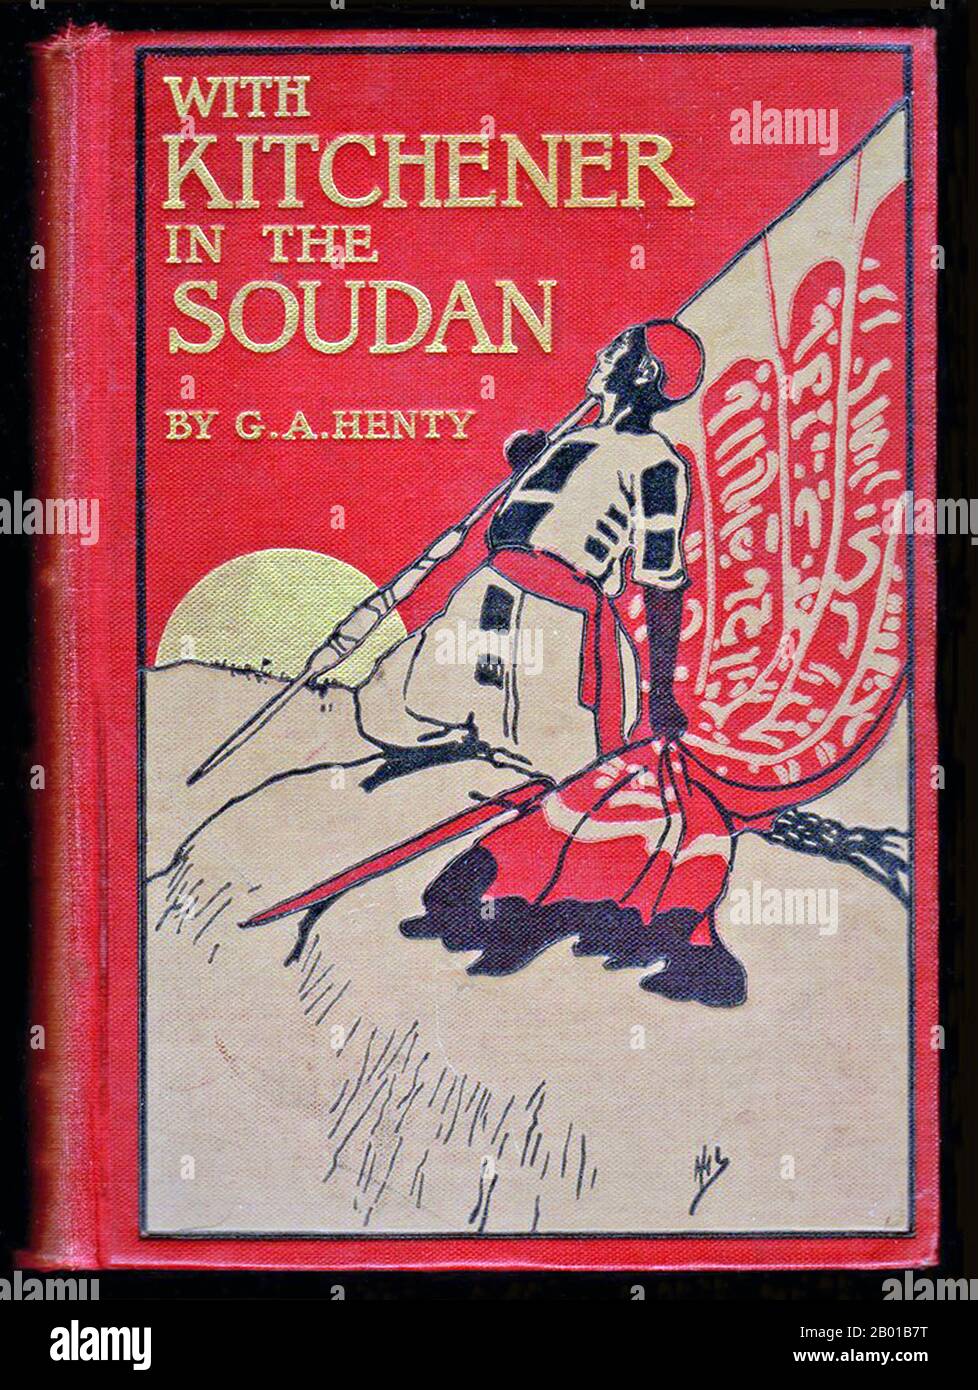 Sudan/United Kingdom: Illustrated cover of 'With Kitchener in the Soudan' by G. A. Henty (8 December 1832 - 16 November 1902), 1903.  'With Kitchener in the Soudan; A Story of Atbara and Omdurman' is an adventure novel by G. A. Henty set during the British military expedition under Lord Kitchener in the Mahdist War (1881-1899), and the subsequent defeat of the Mahdi's followers and Sudan's conquest. It was first published in 1902.  Kitchener won fame in 1898 for winning the Battle of Omdurman and securing control of the Sudan, after which he was given the title 'Lord Kitchener of Khartoum'. Stock Photo